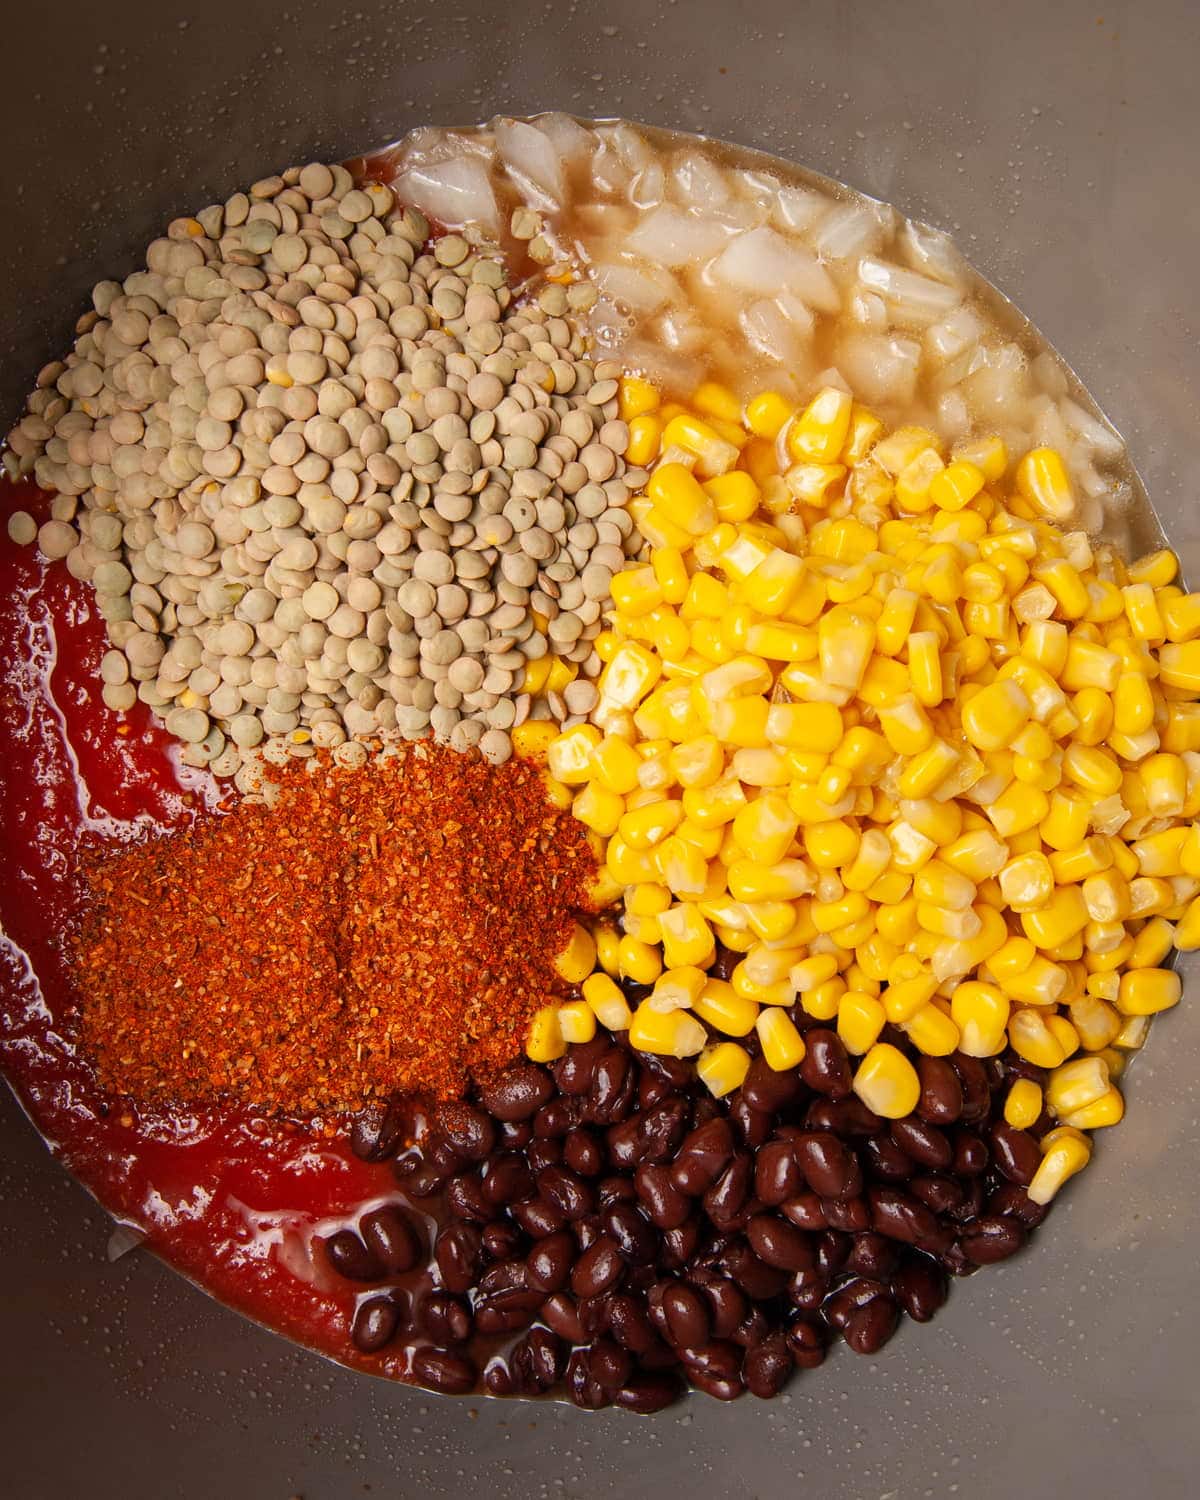 adding all vegan chili ingredients to the pot to cook